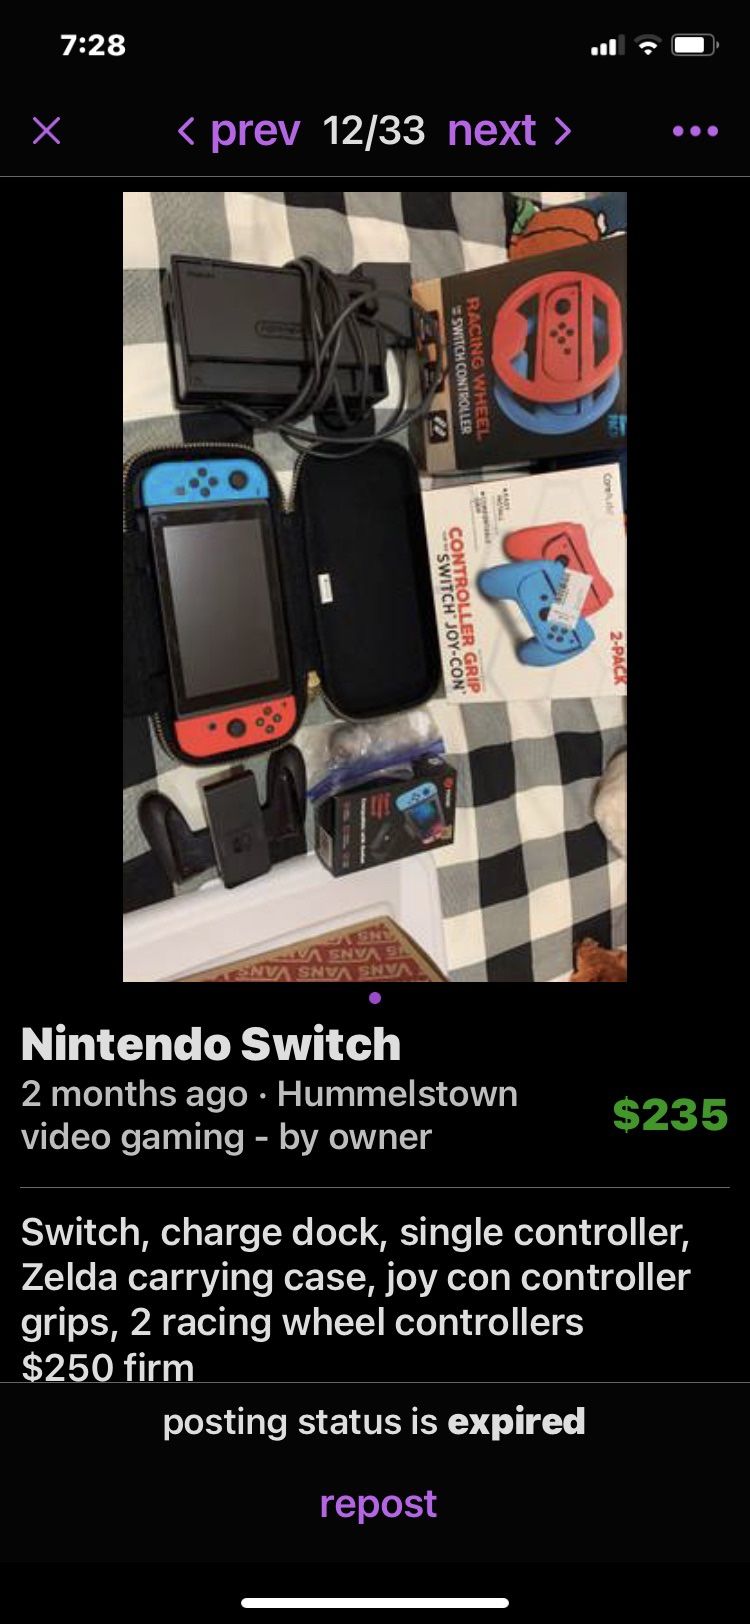 Nintendo Switch with Accessories 